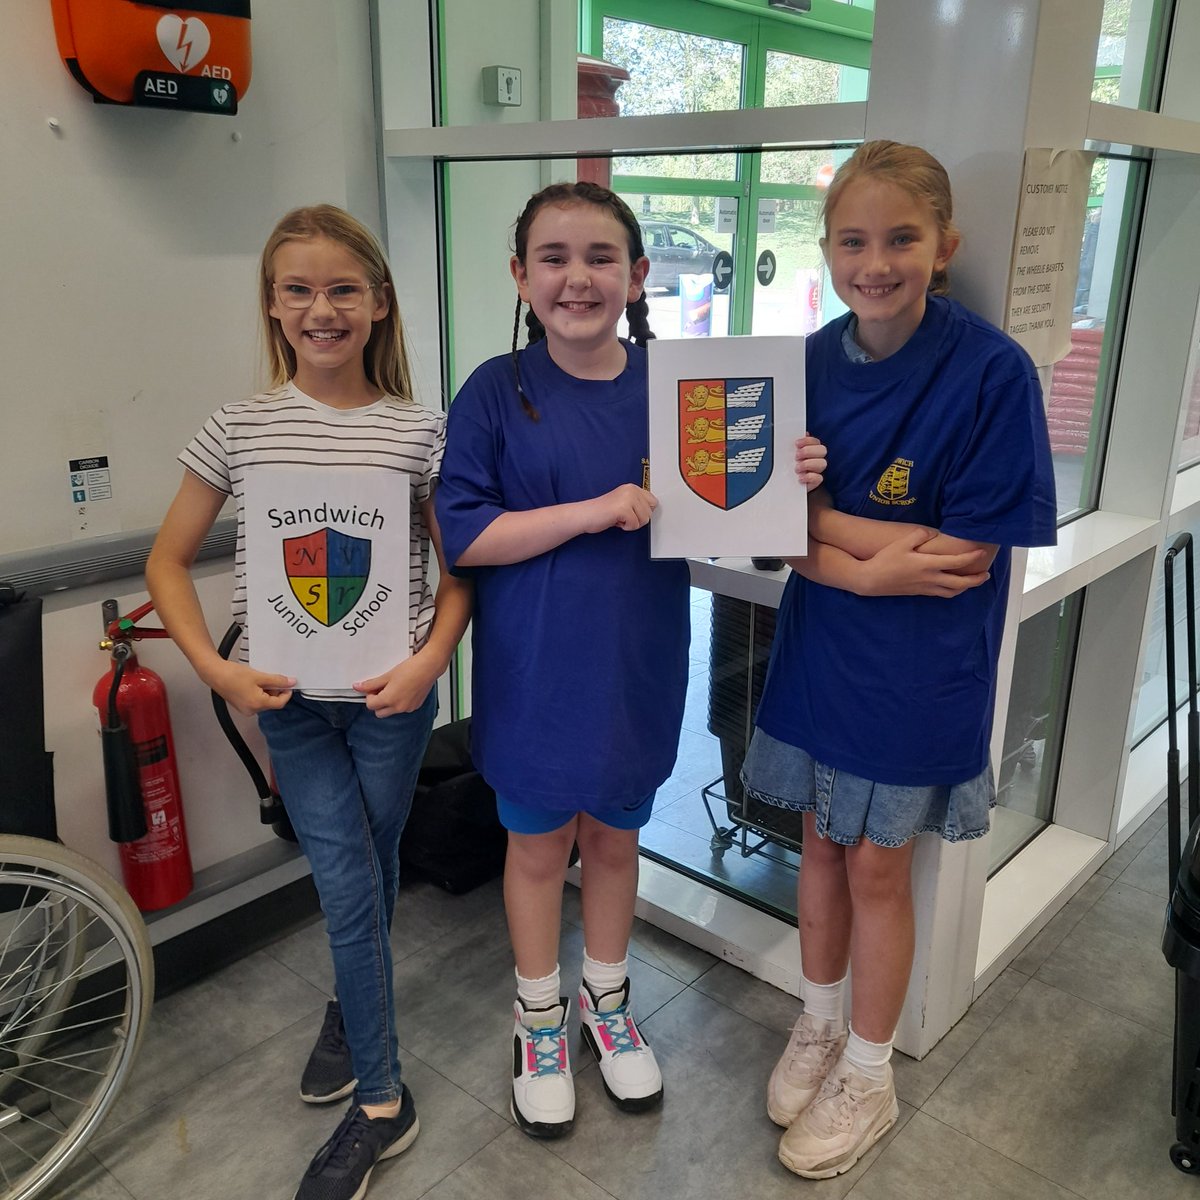 @SandwichJunior Amy, Izzy and Arwen supporting the PTFA selling tickets at the Co-op this morning in Sandwich. Some great little businesswomen there!